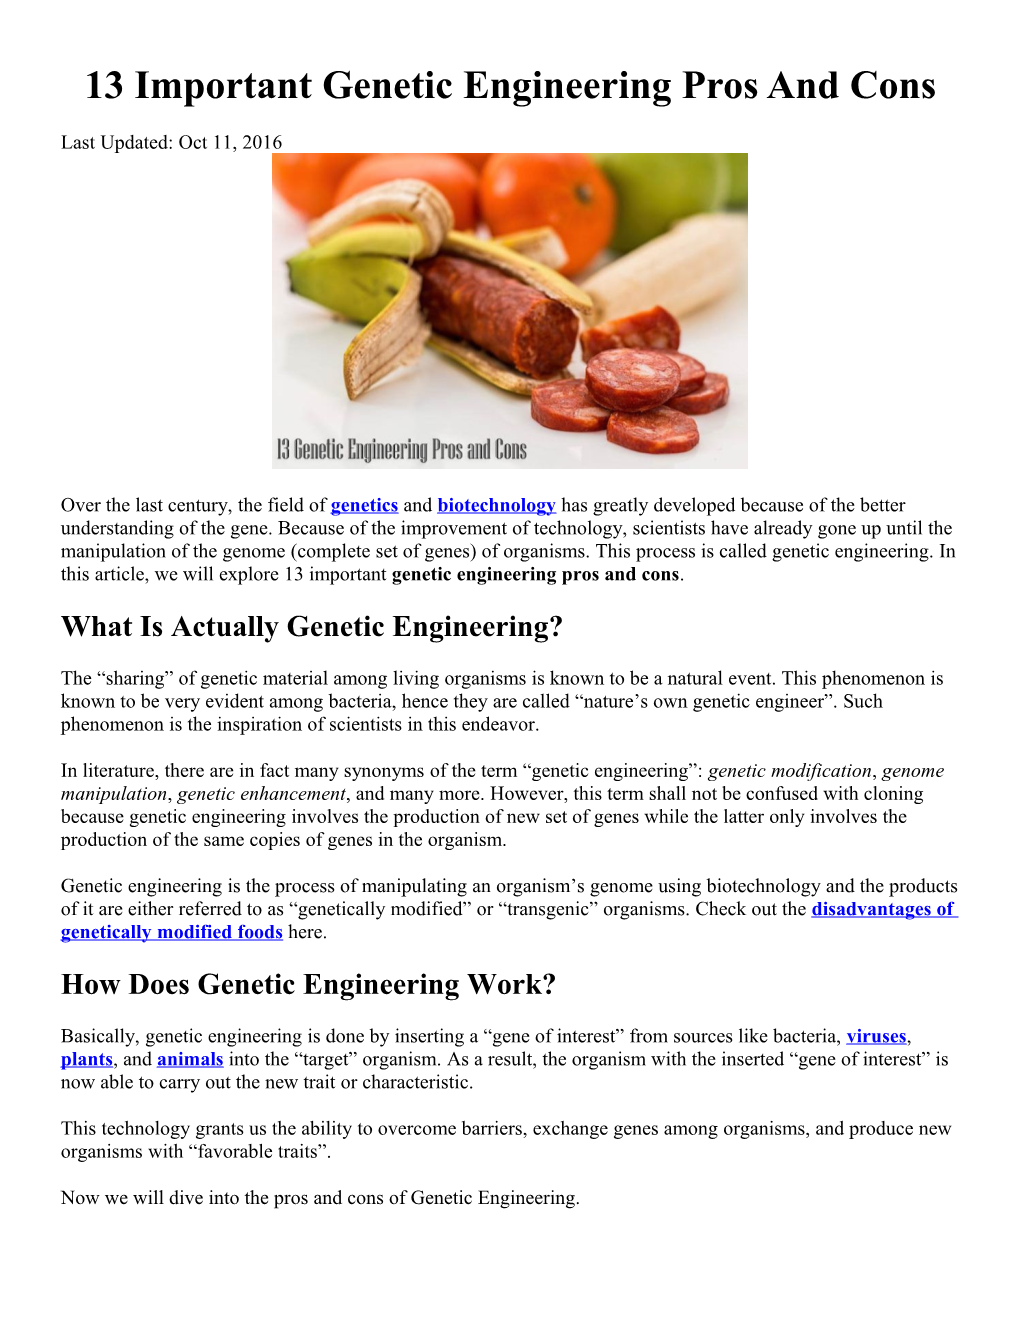 13 Important Genetic Engineering Pros and Cons